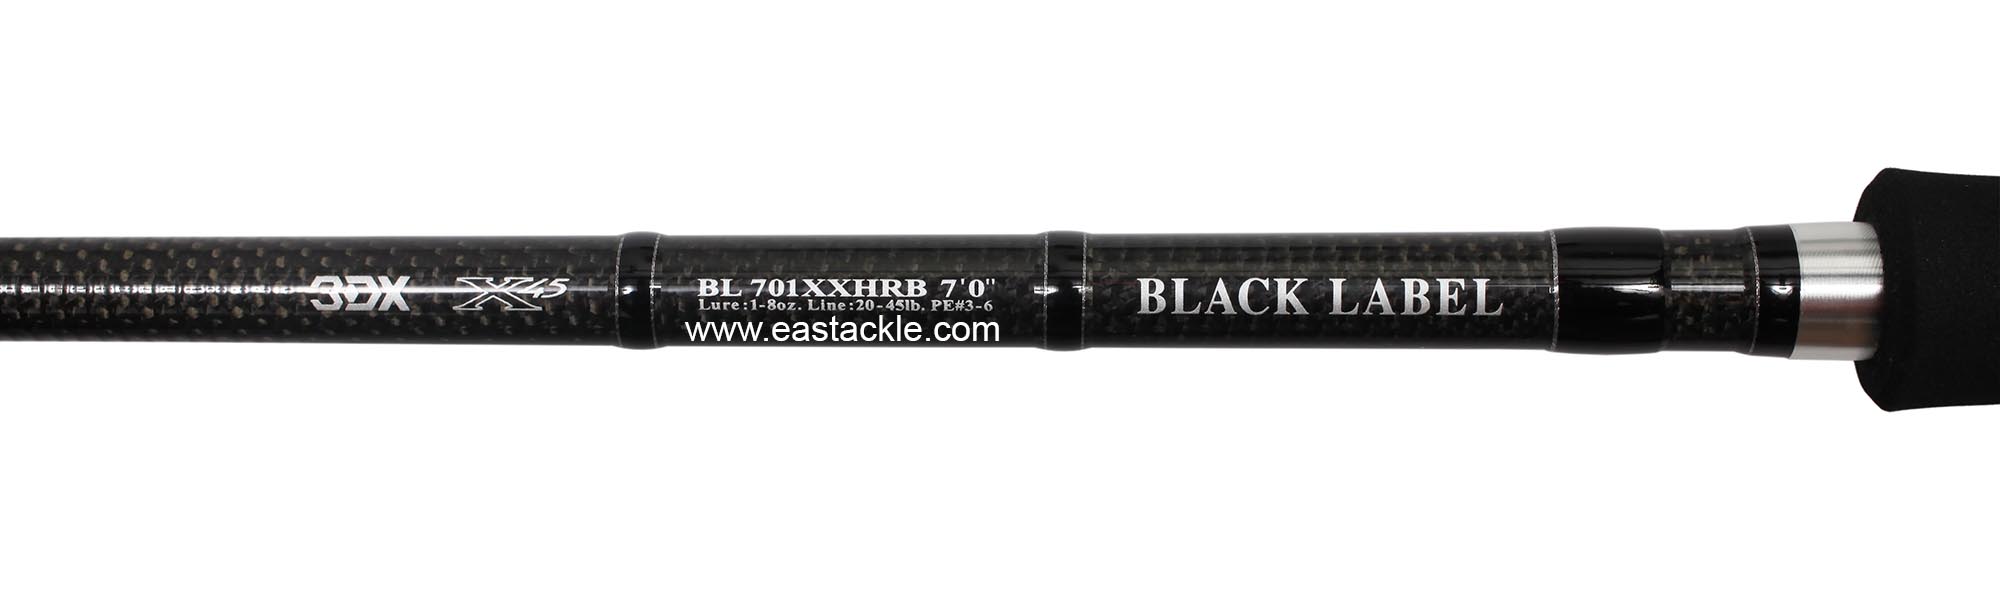 Daiwa - Black Label 701XXHB - Bait Casting Rod - Logo and Blank Specifications | Eastackle 